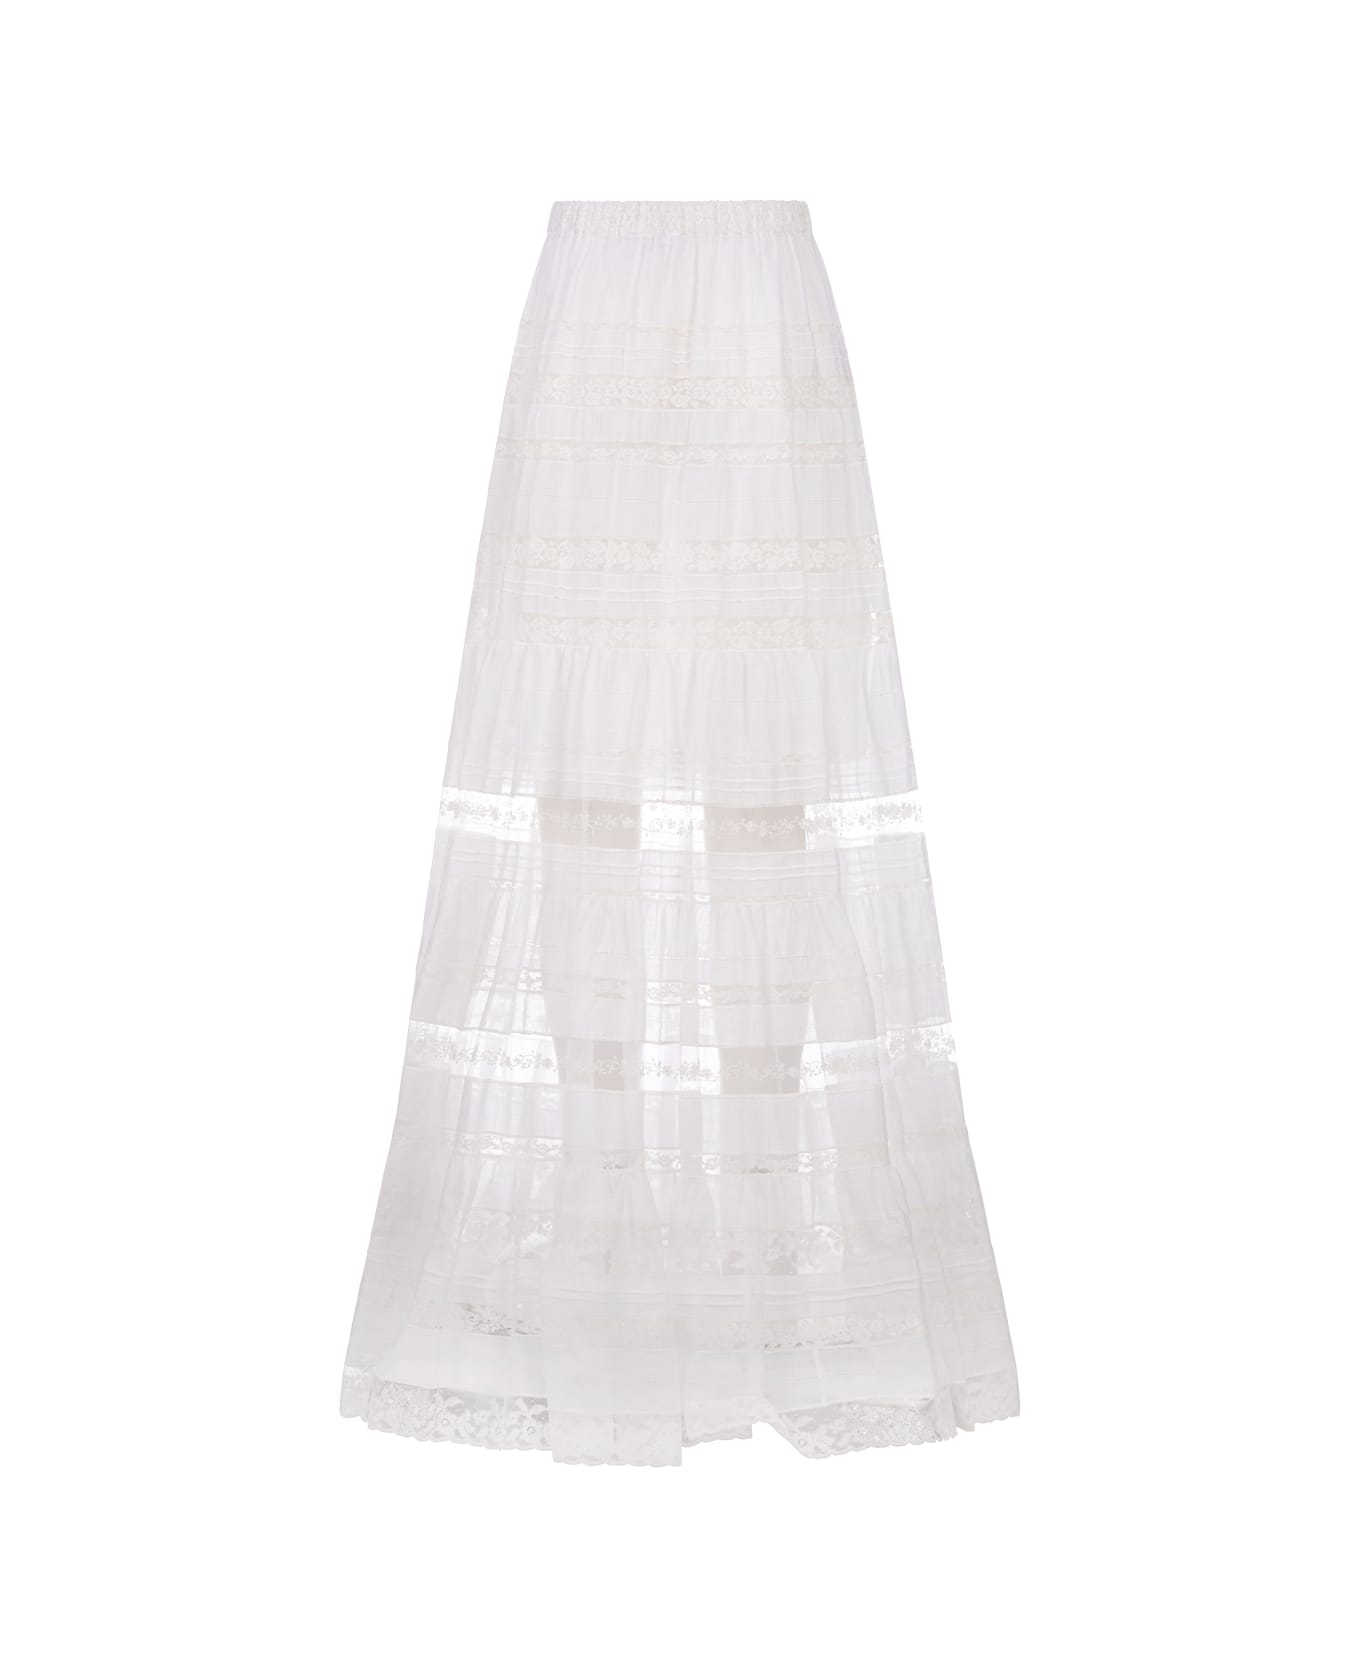 Ermanno Scervino Long White Ramiè Skirt With Valencienne Lace - White スカート